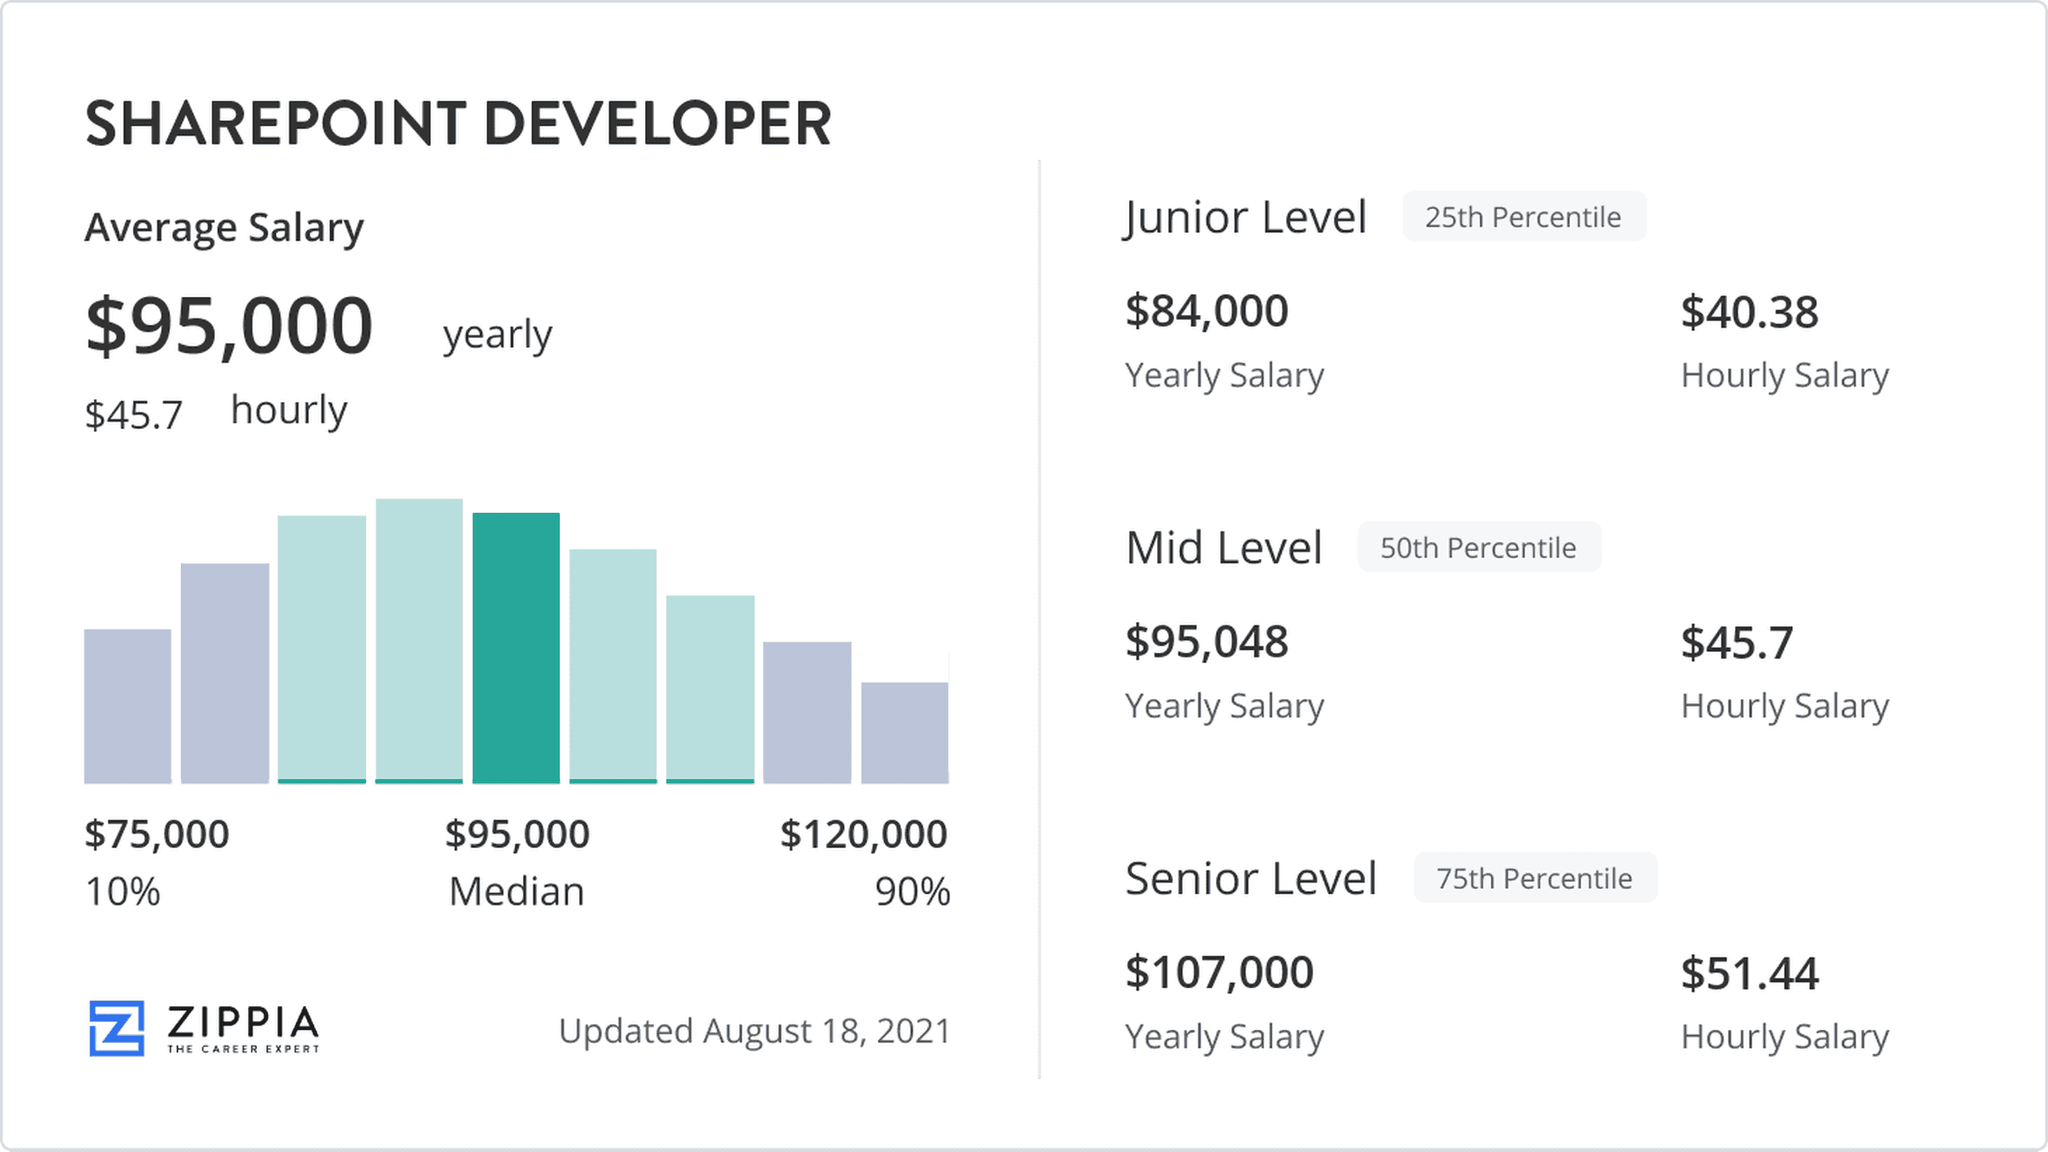 How Much Does A Sharepoint Developer Make?